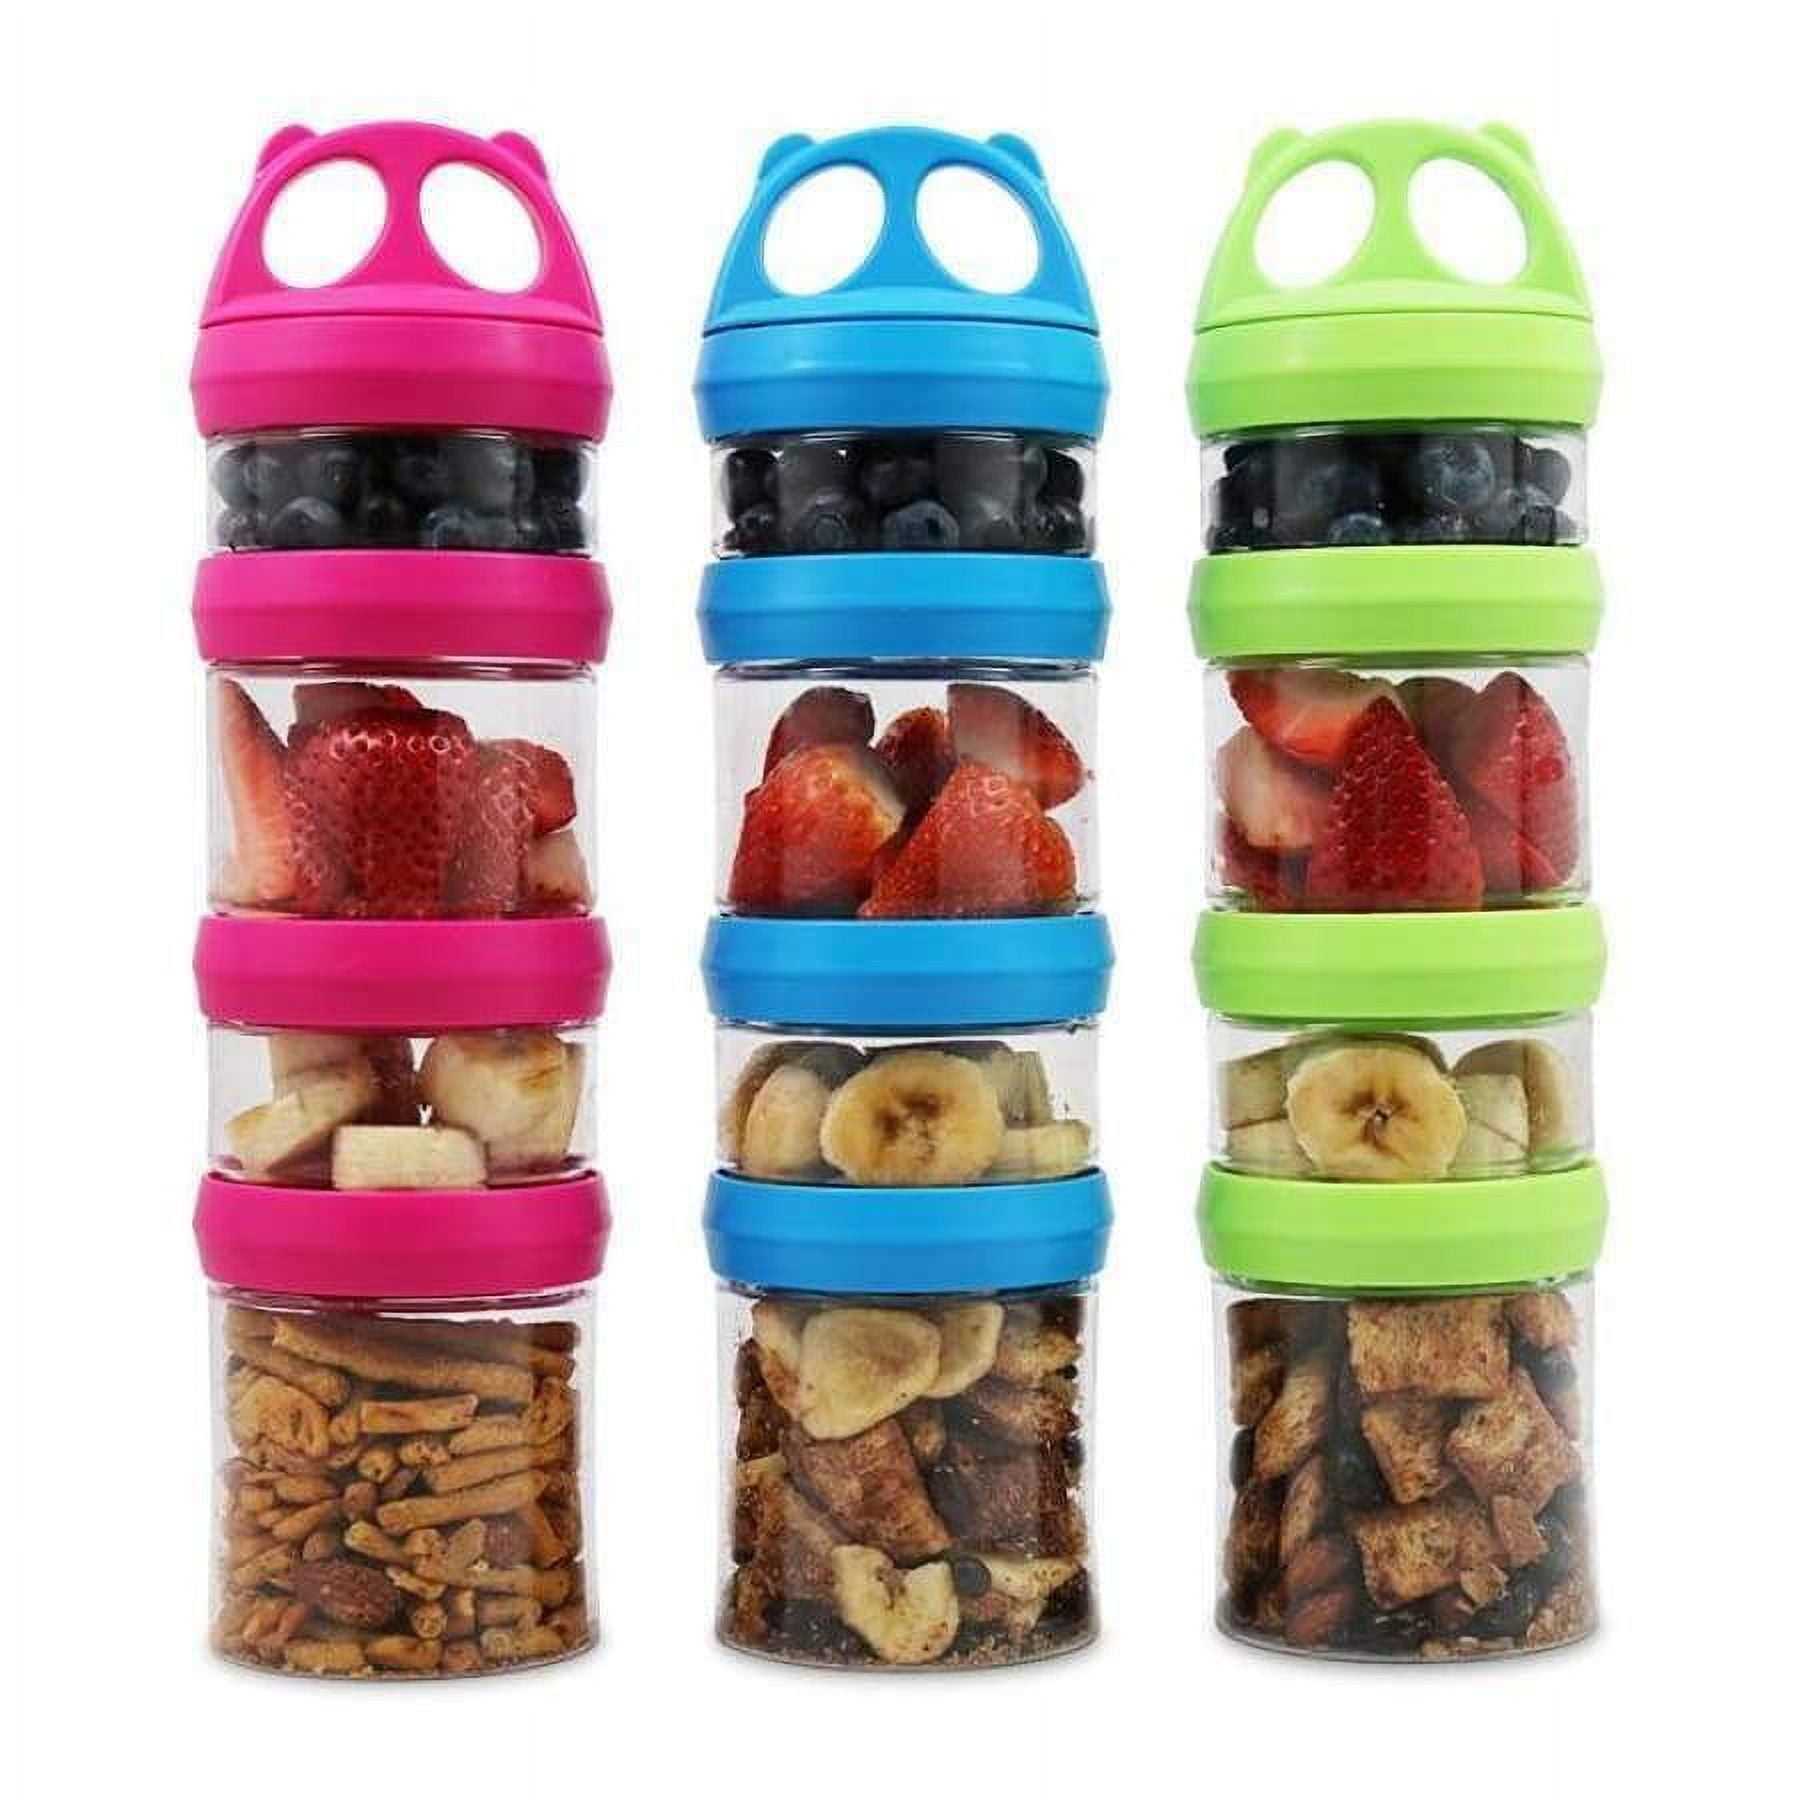 Safari Snack Boxes: 3 Count Pack with 3 Sizes, Snack Containers for School, Easy Open, Leak Proof Small Food Containers with Lids